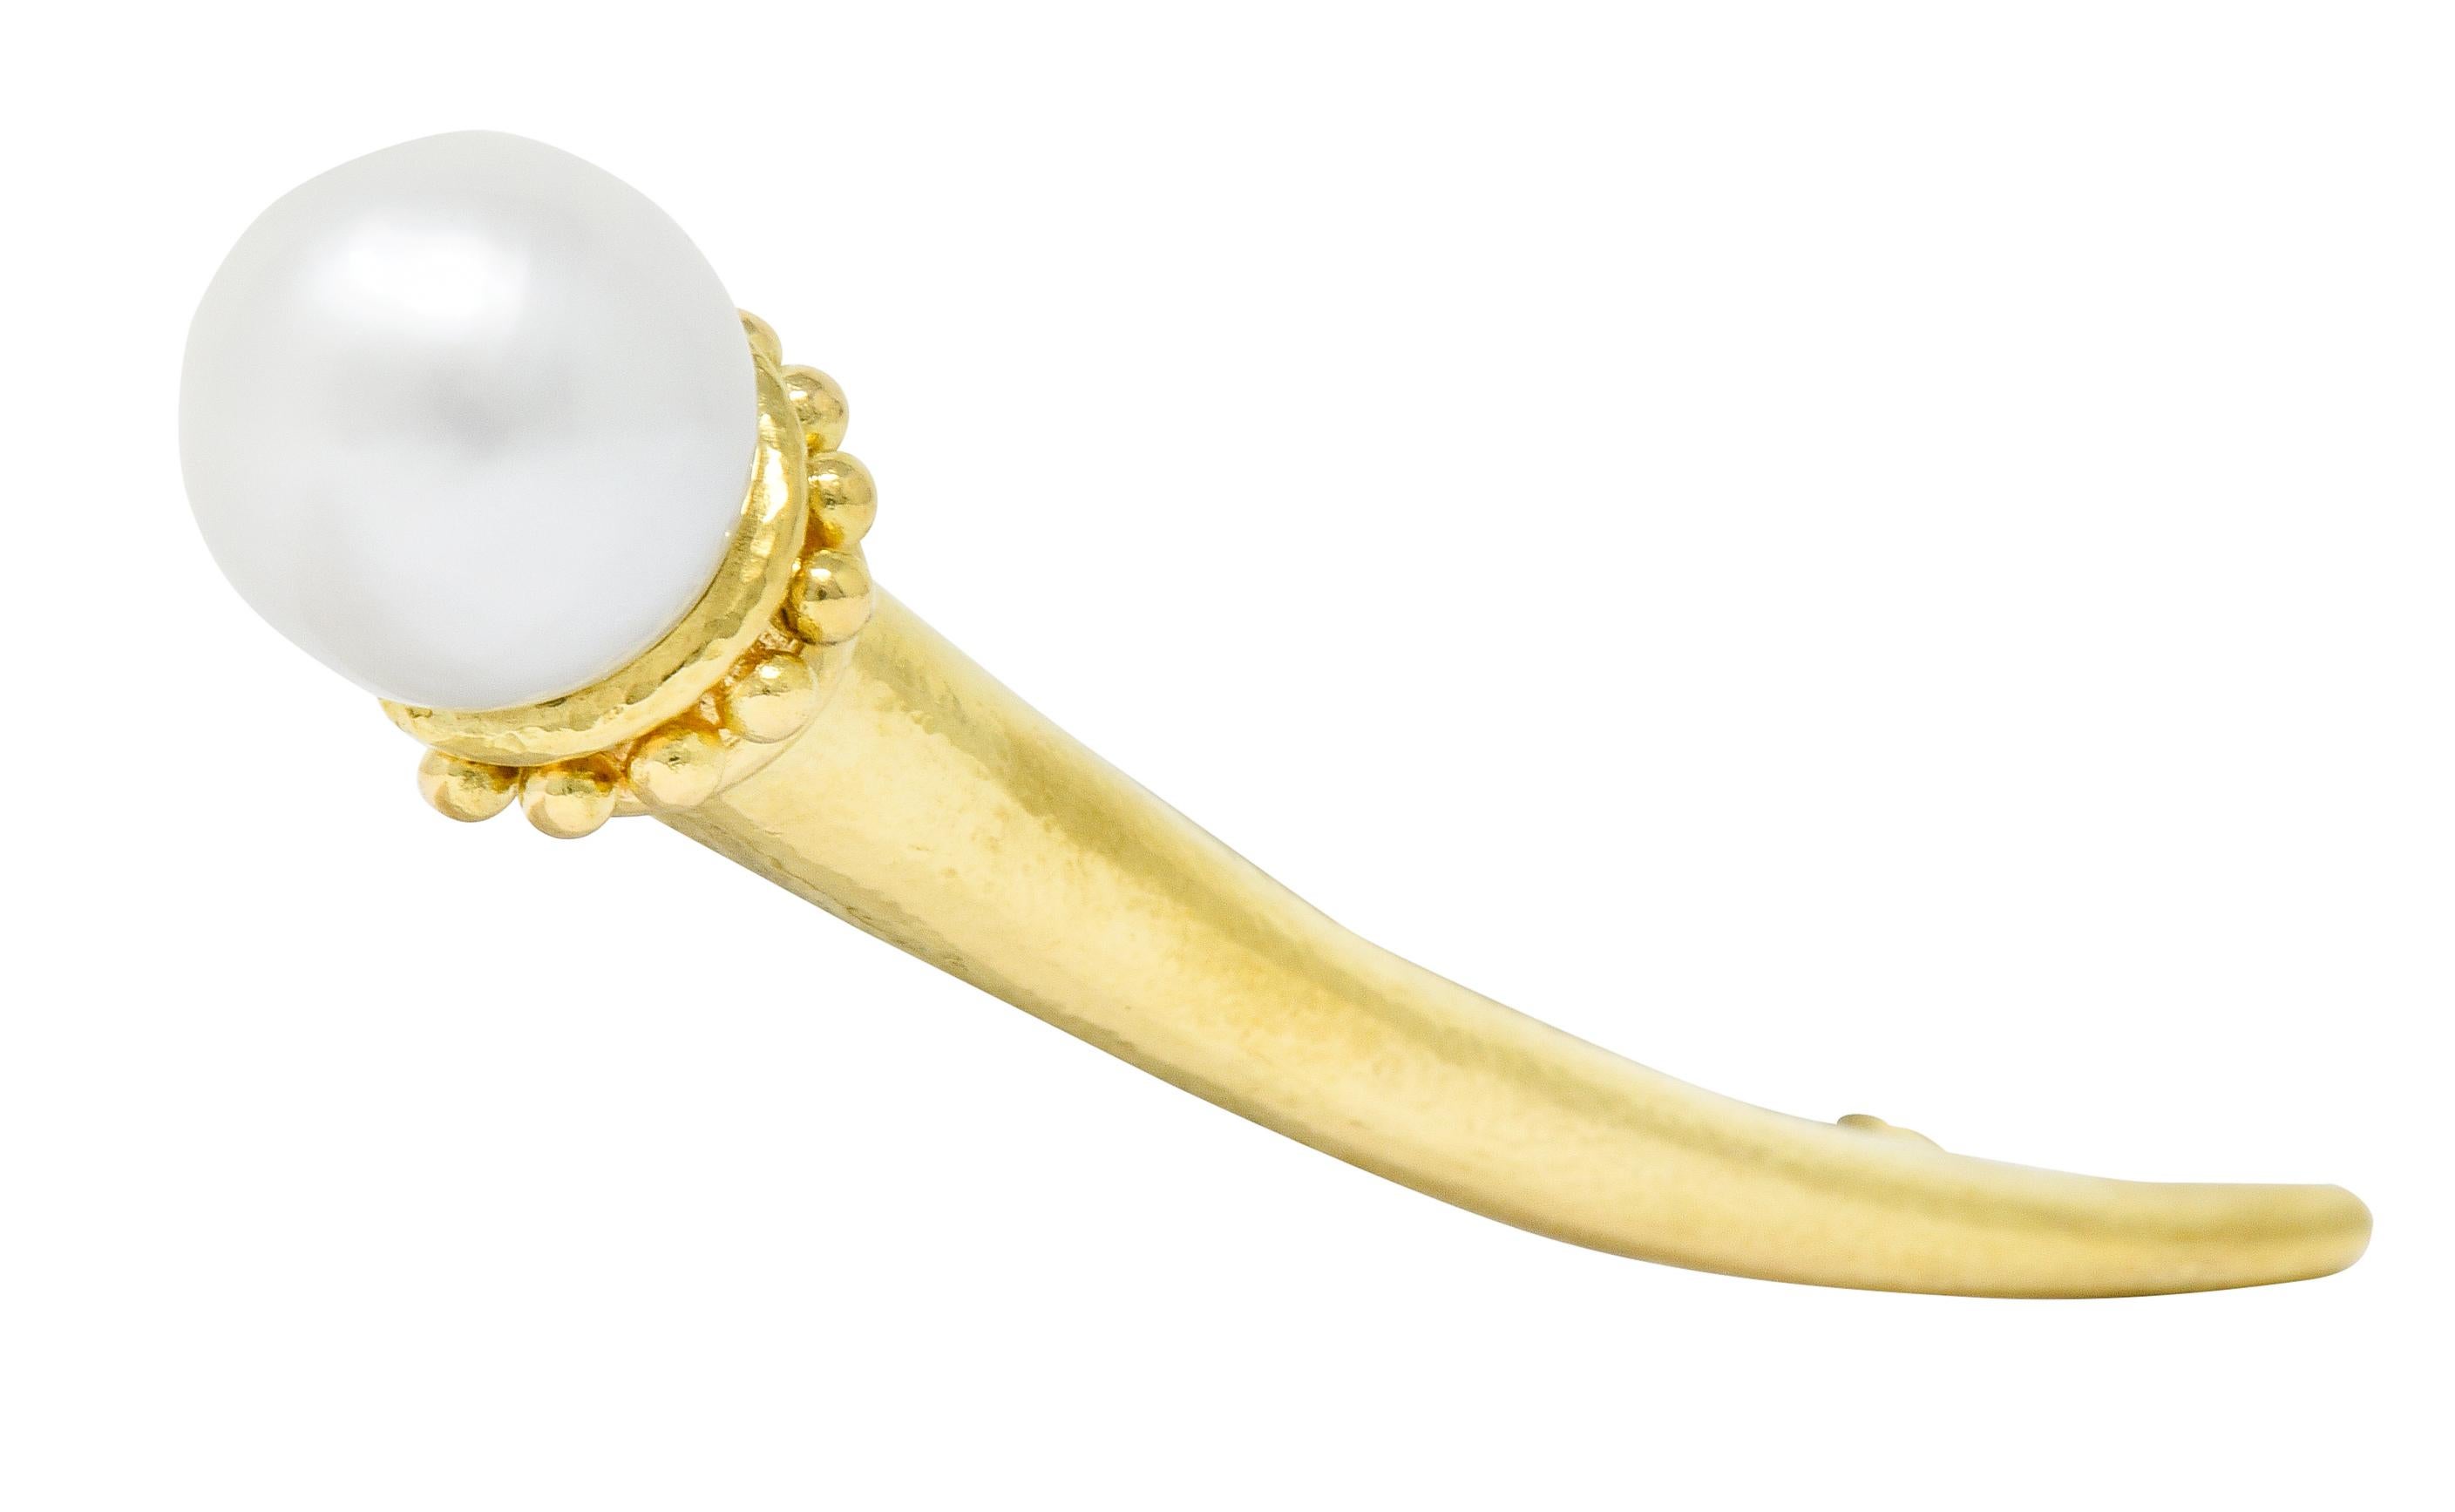 Brooch is designed as a stylized spiculum shaped talon with a very slight hammered finish

Terminating on one end as a decorative pearl cup featuring a gold bead motif

Topped by a 13.0 mm round cultured pearl, white in body color with strong silver